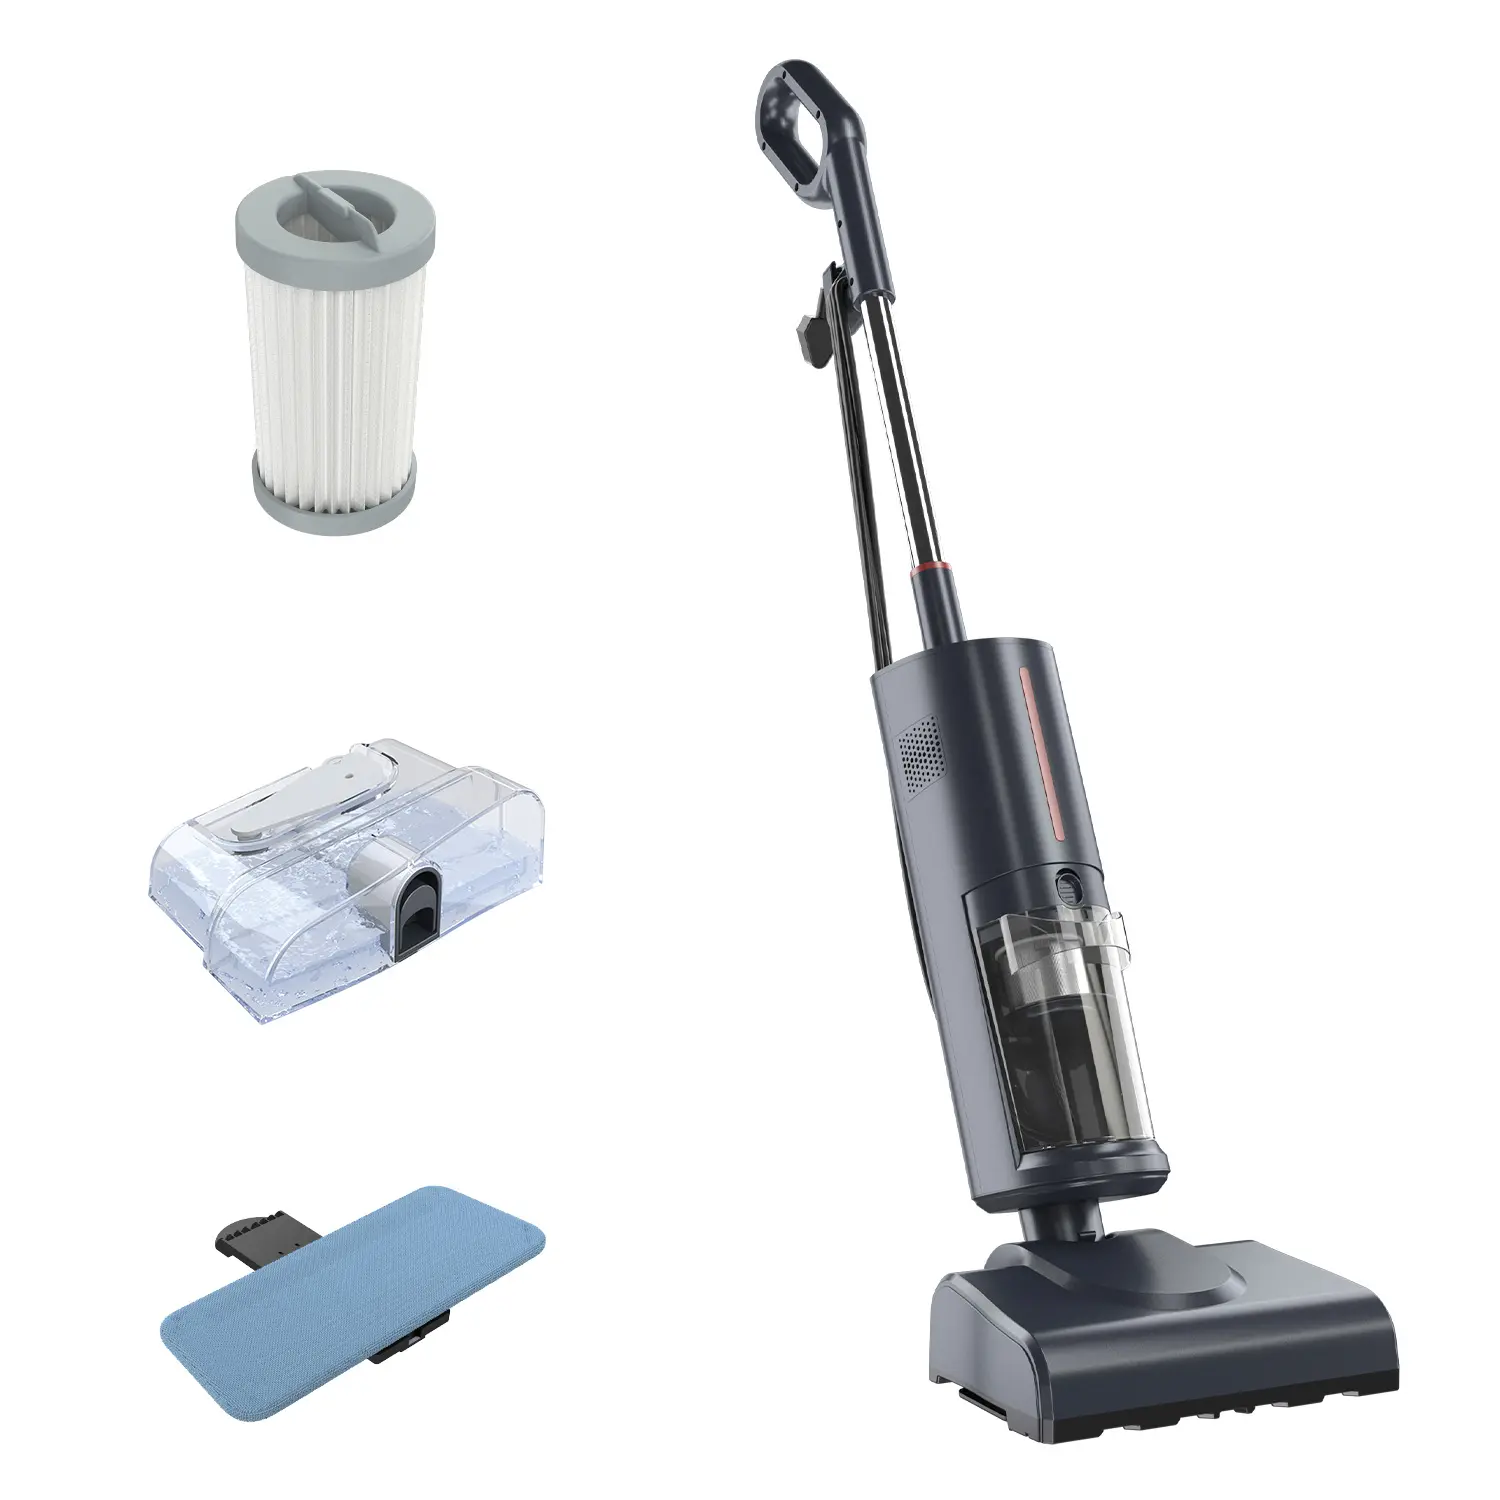 Wet and dry vacuum 1600w steam mop 3-in-1 stick corded vacuum cleaner professional with cord